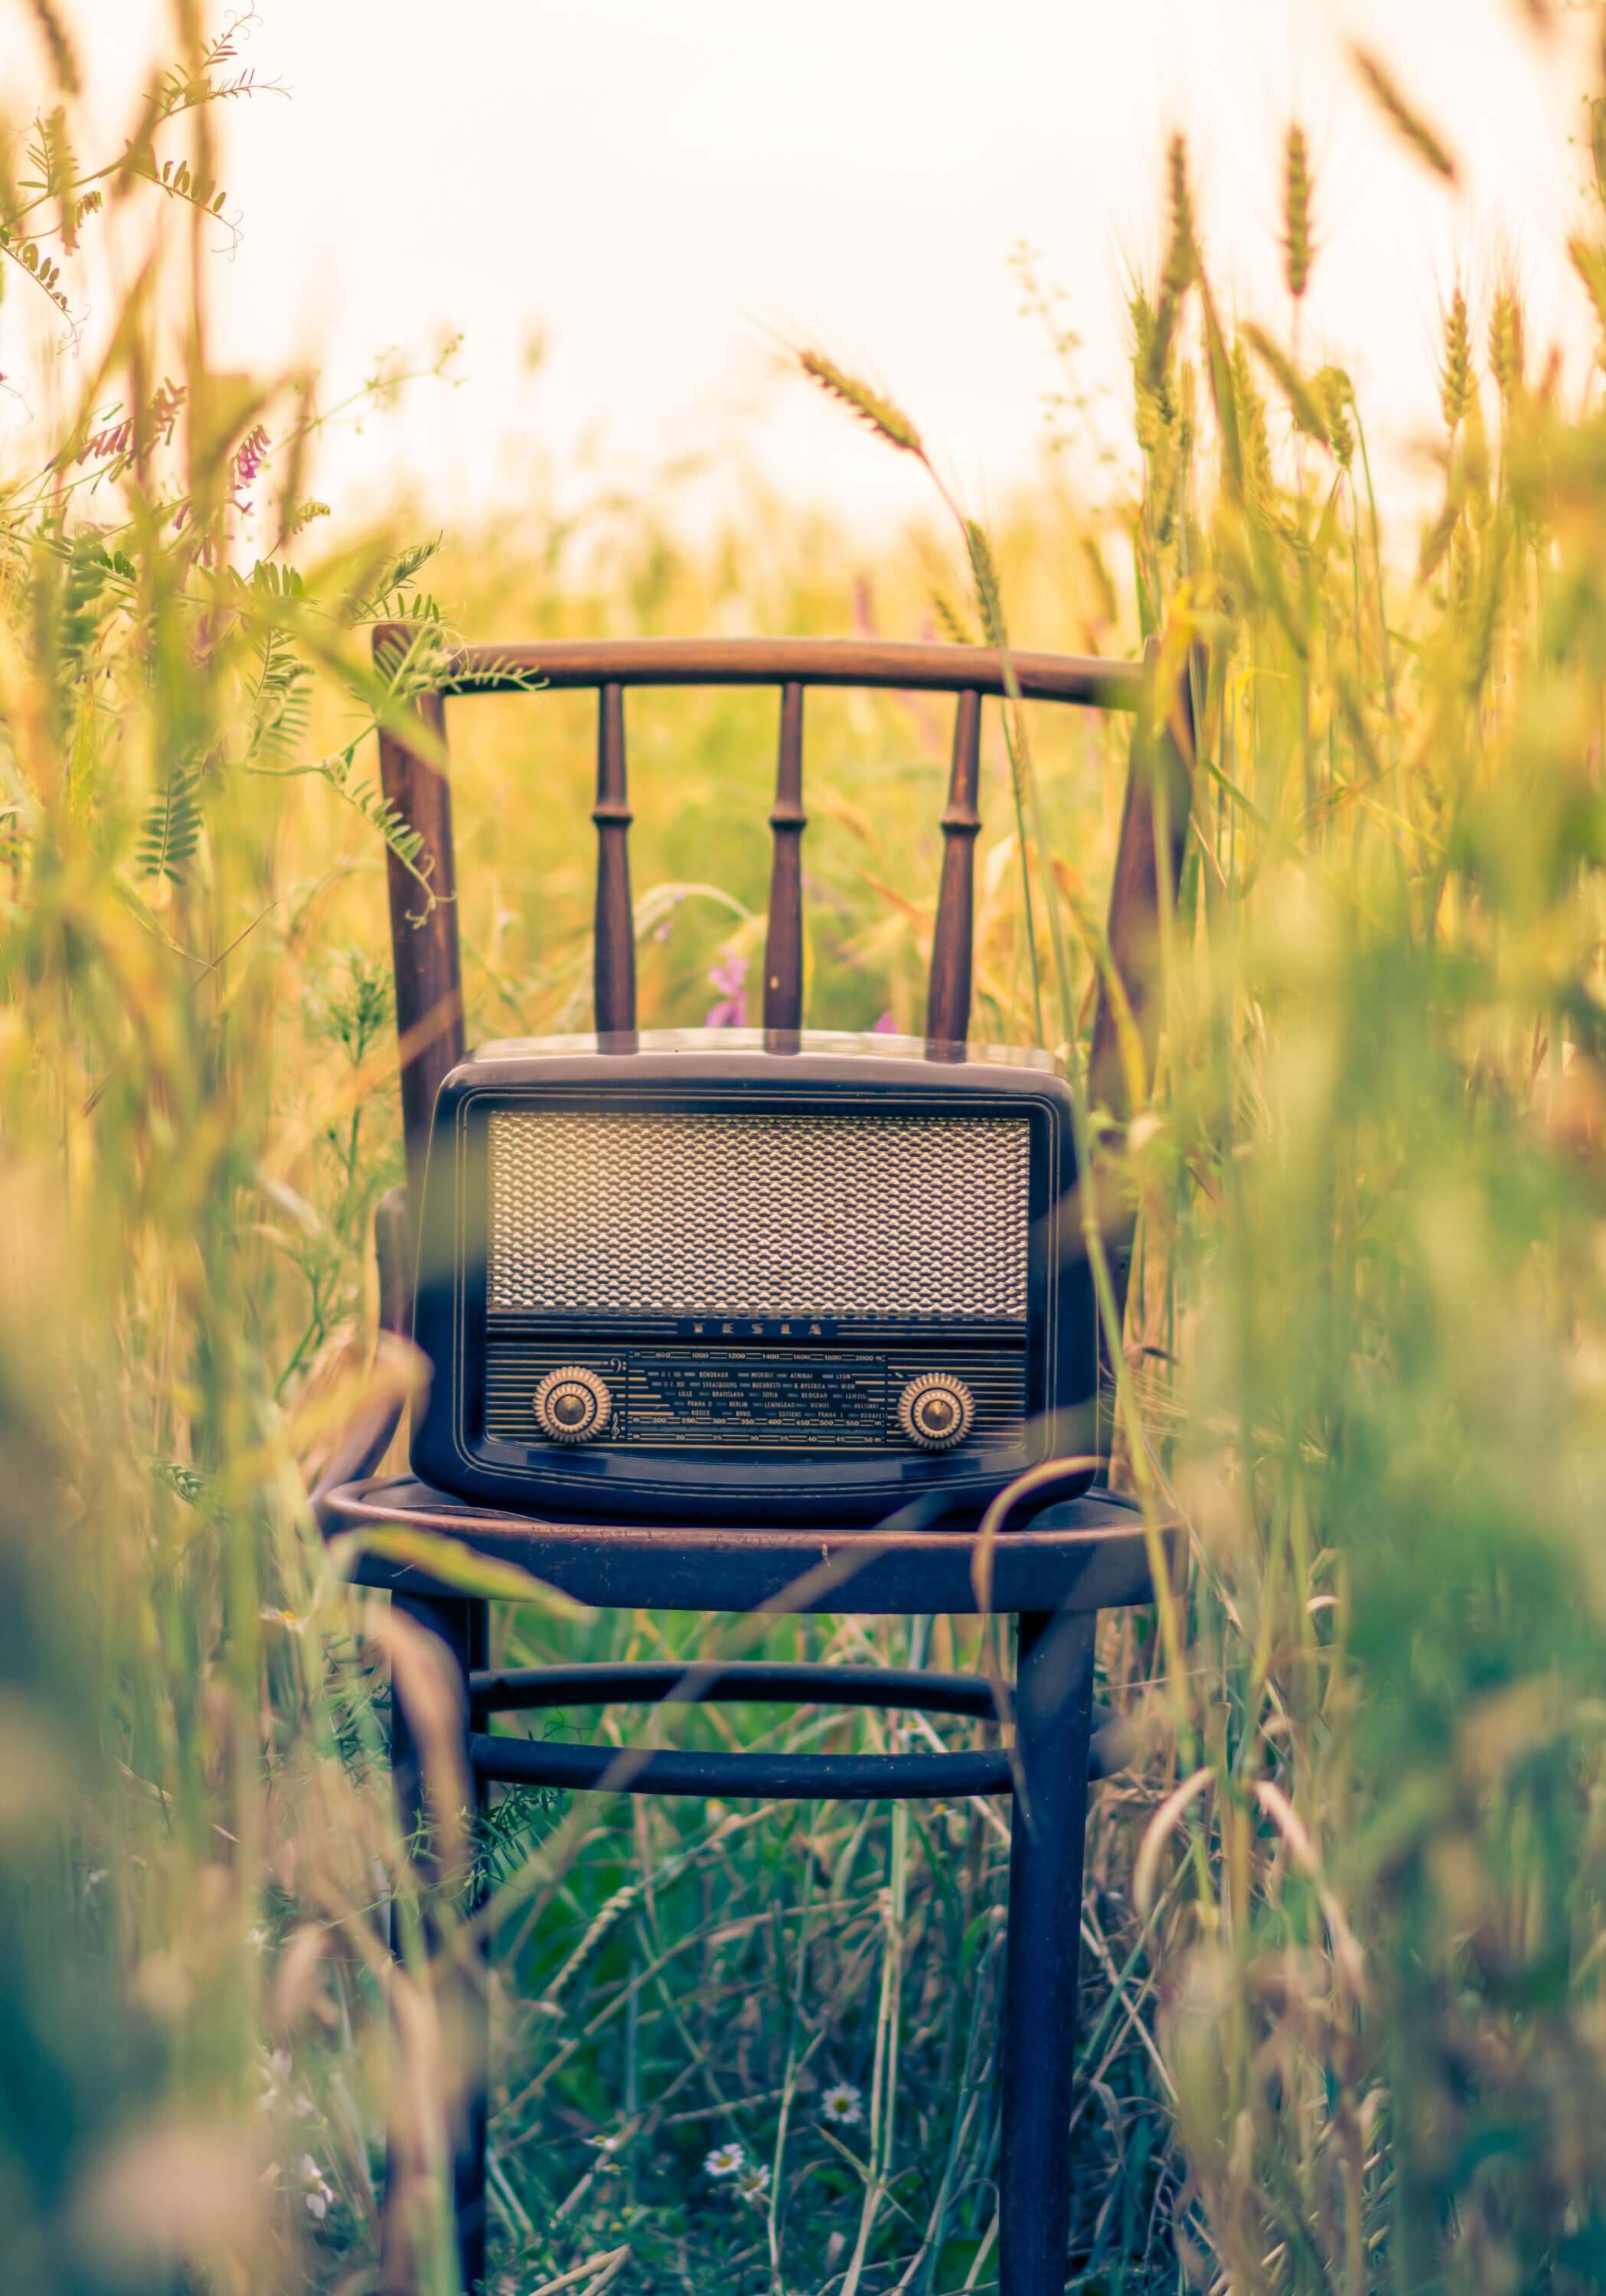 Radio on a chair in a field